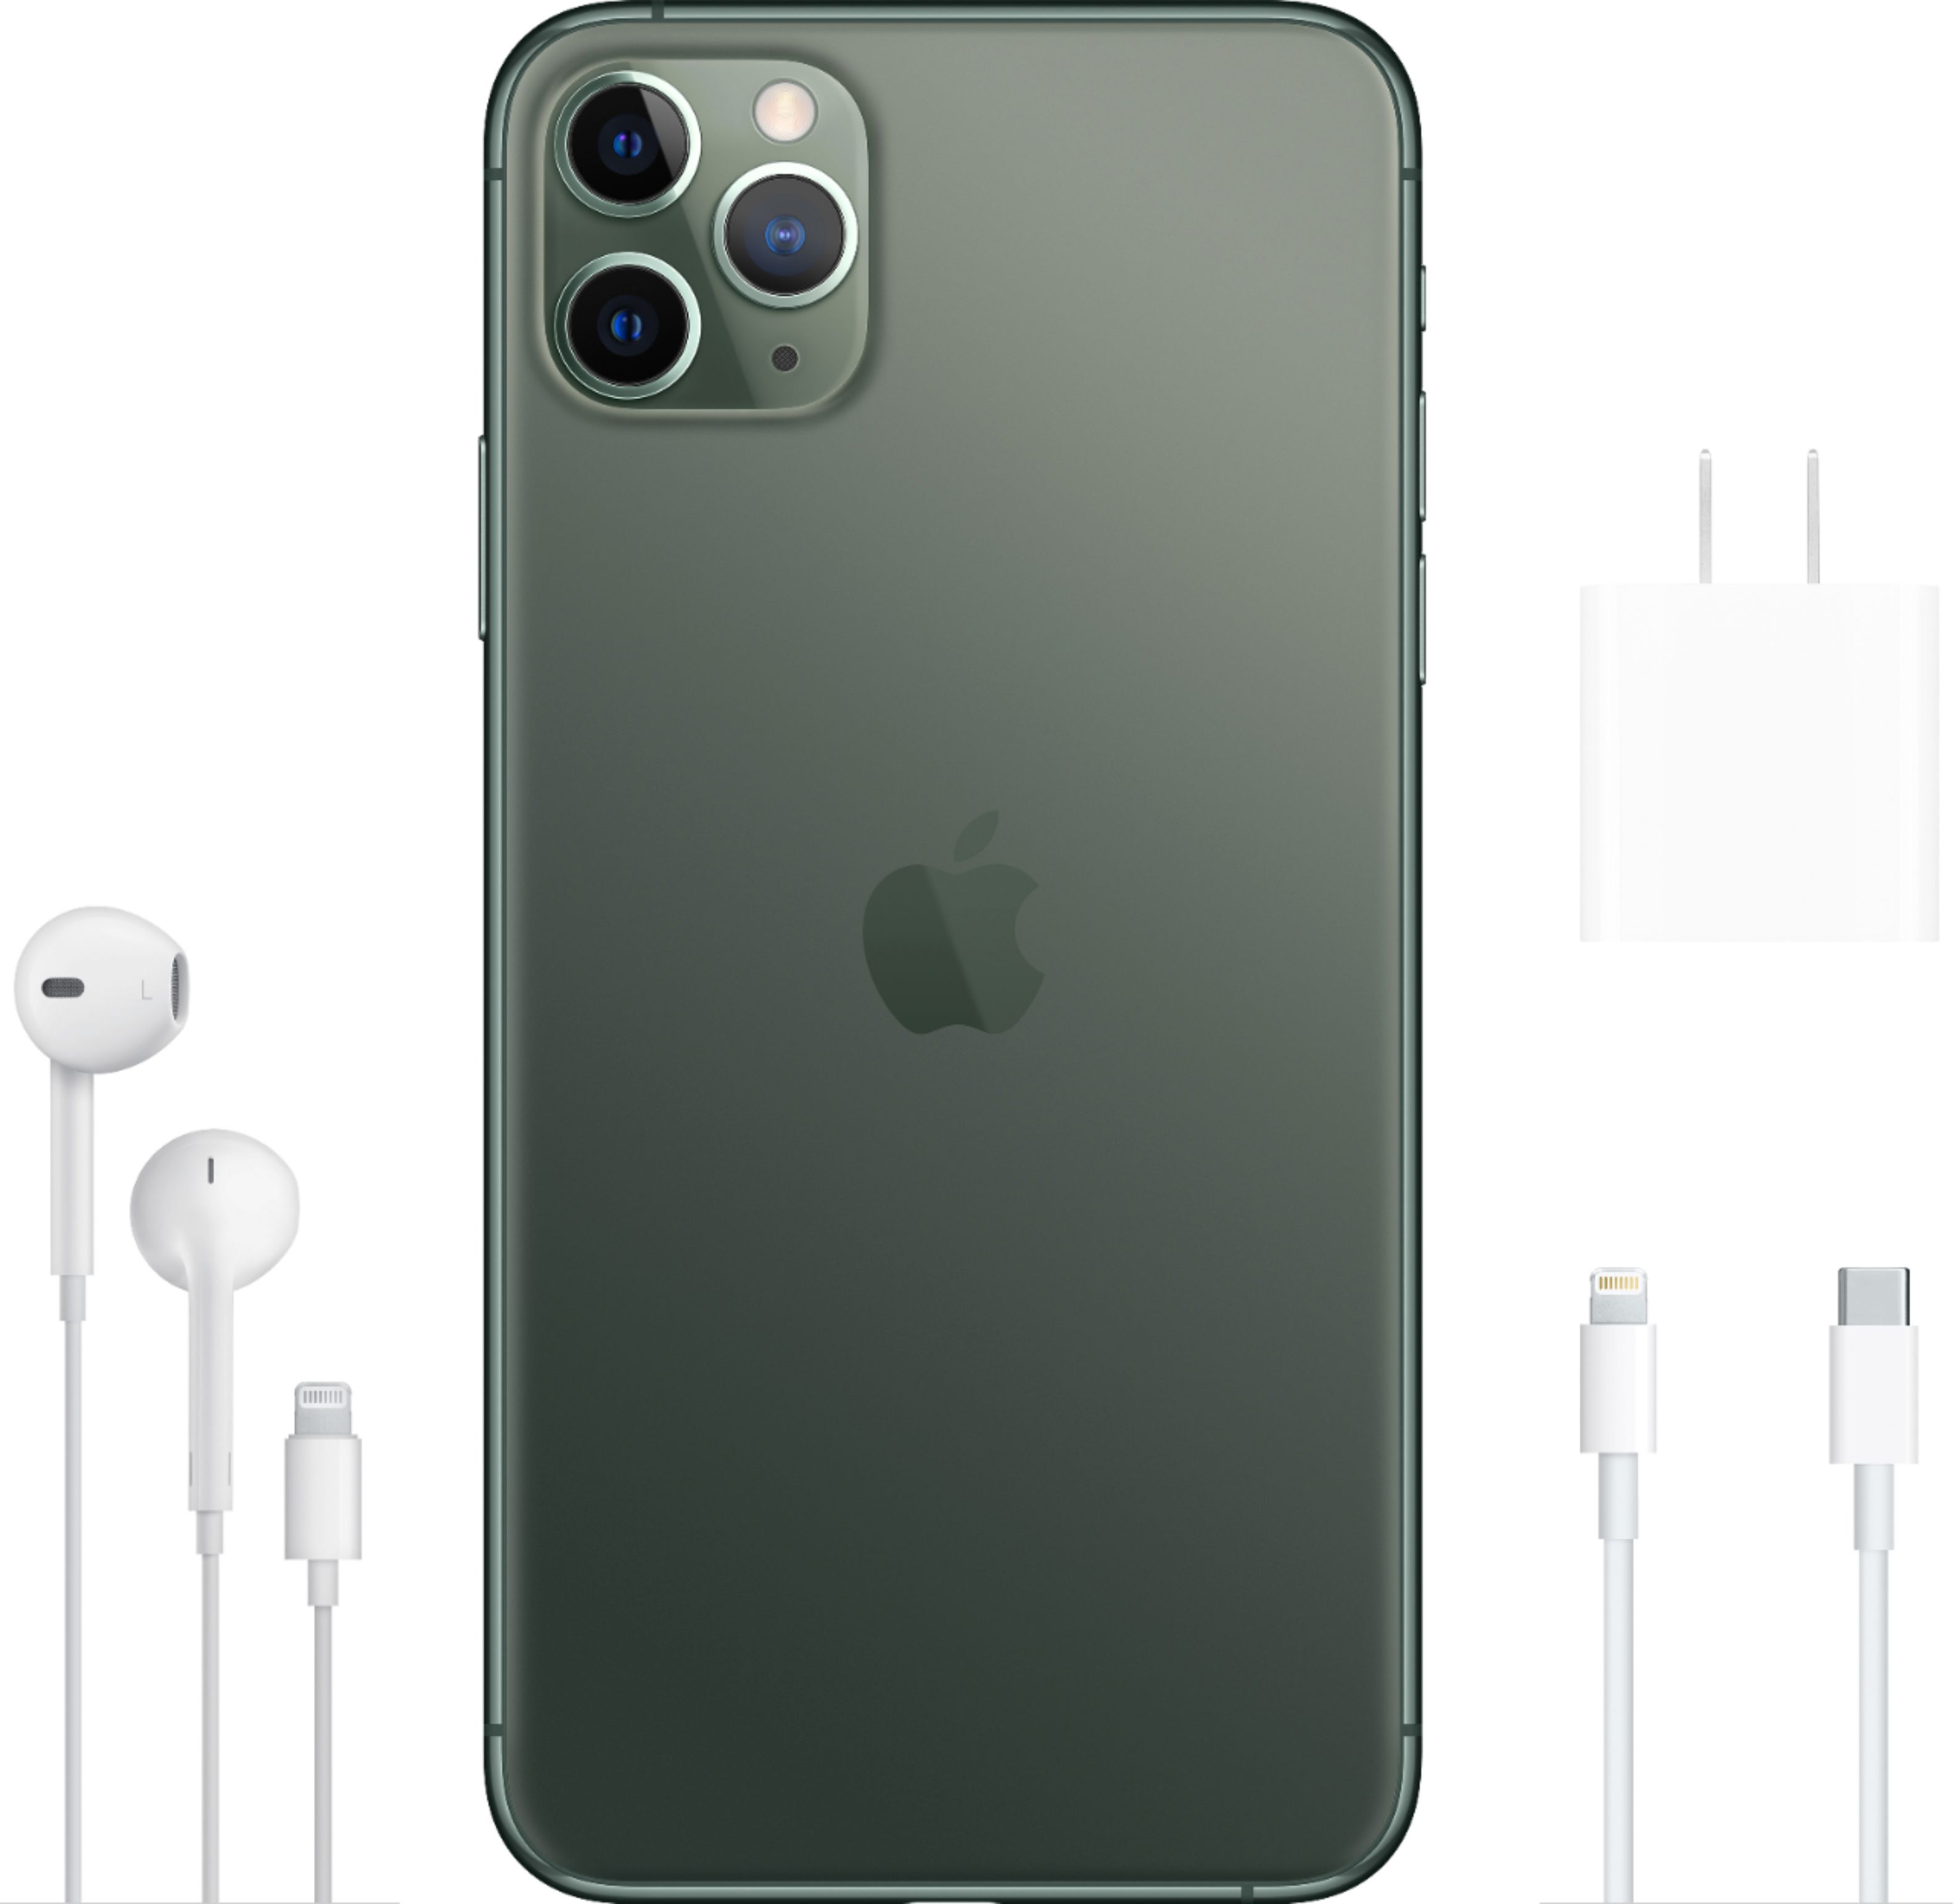 Best Buy Apple Iphone 11 Pro Max 256gb Midnight Green At T Mwh72ll A